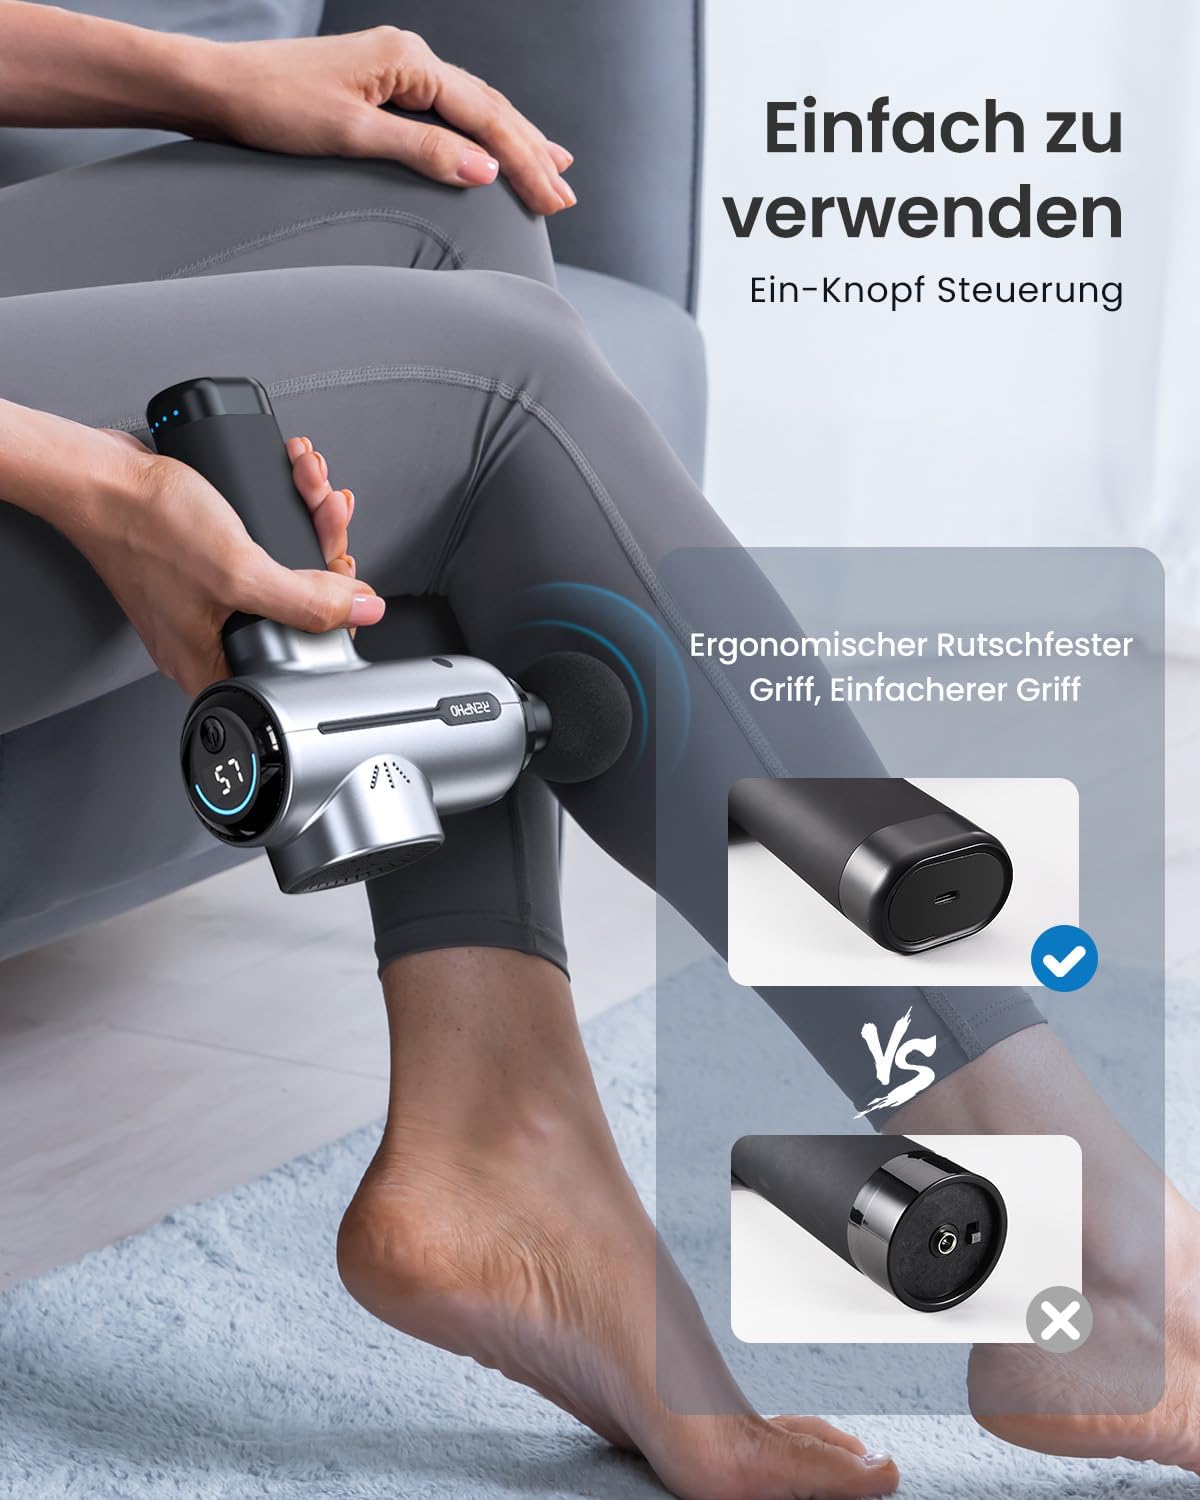 An advertisement featuring a person using the Renpho Massage Gun with Screen on their calf includes close-ups of the device's ergonomic, non-slip grip and one-button control. Text emphasizes ease of use with a checkmark.